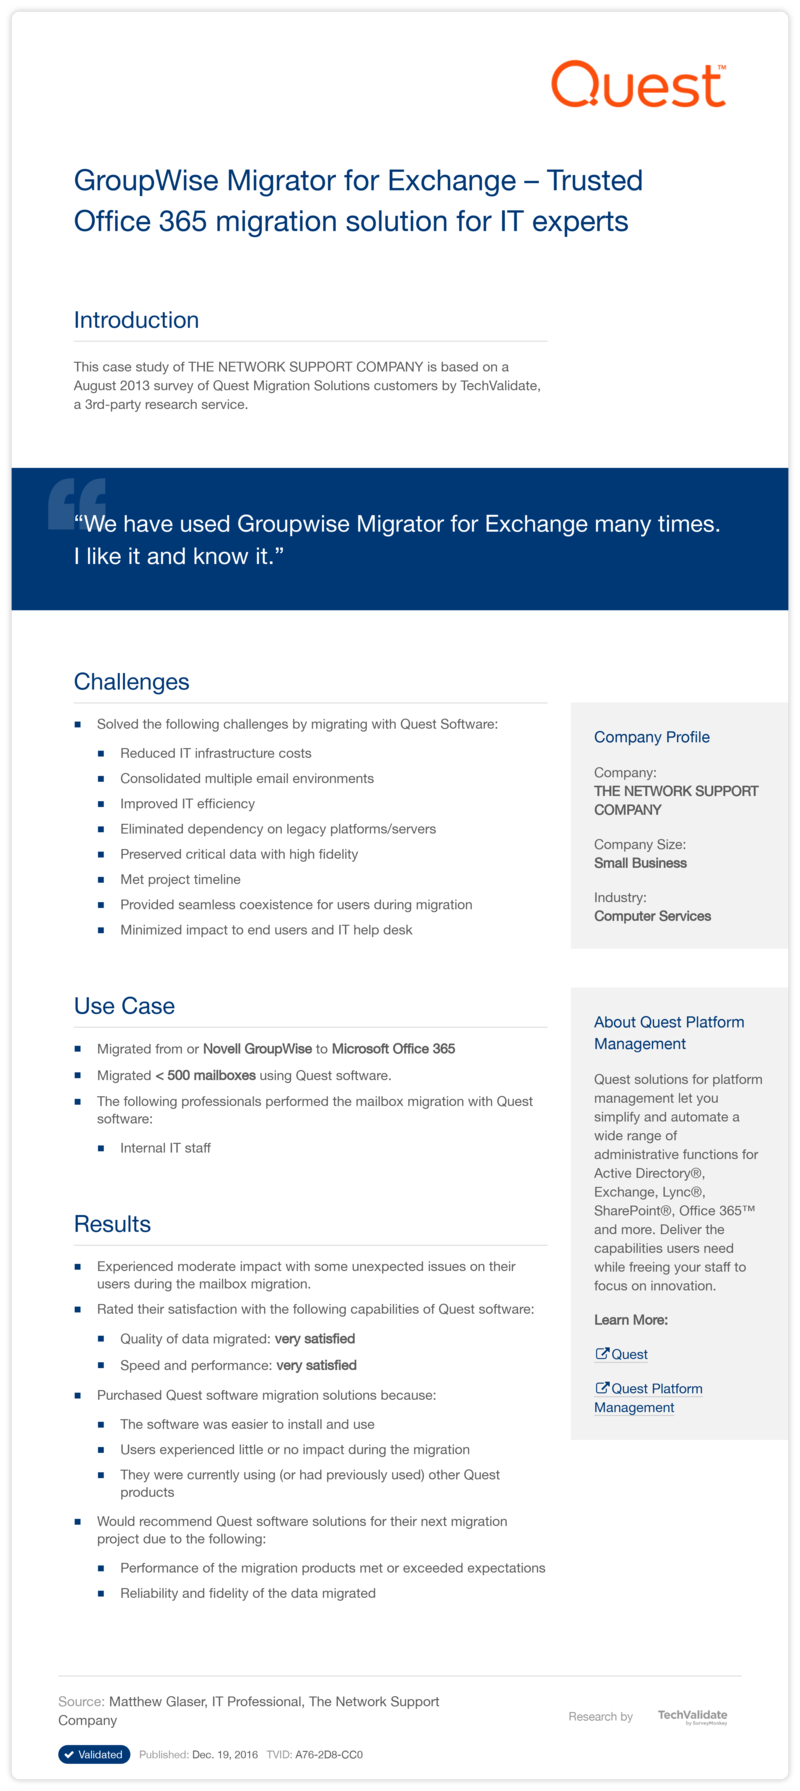 GroupWise Migrator for Exchange-Trusted Office 365 migration solution for IT experts